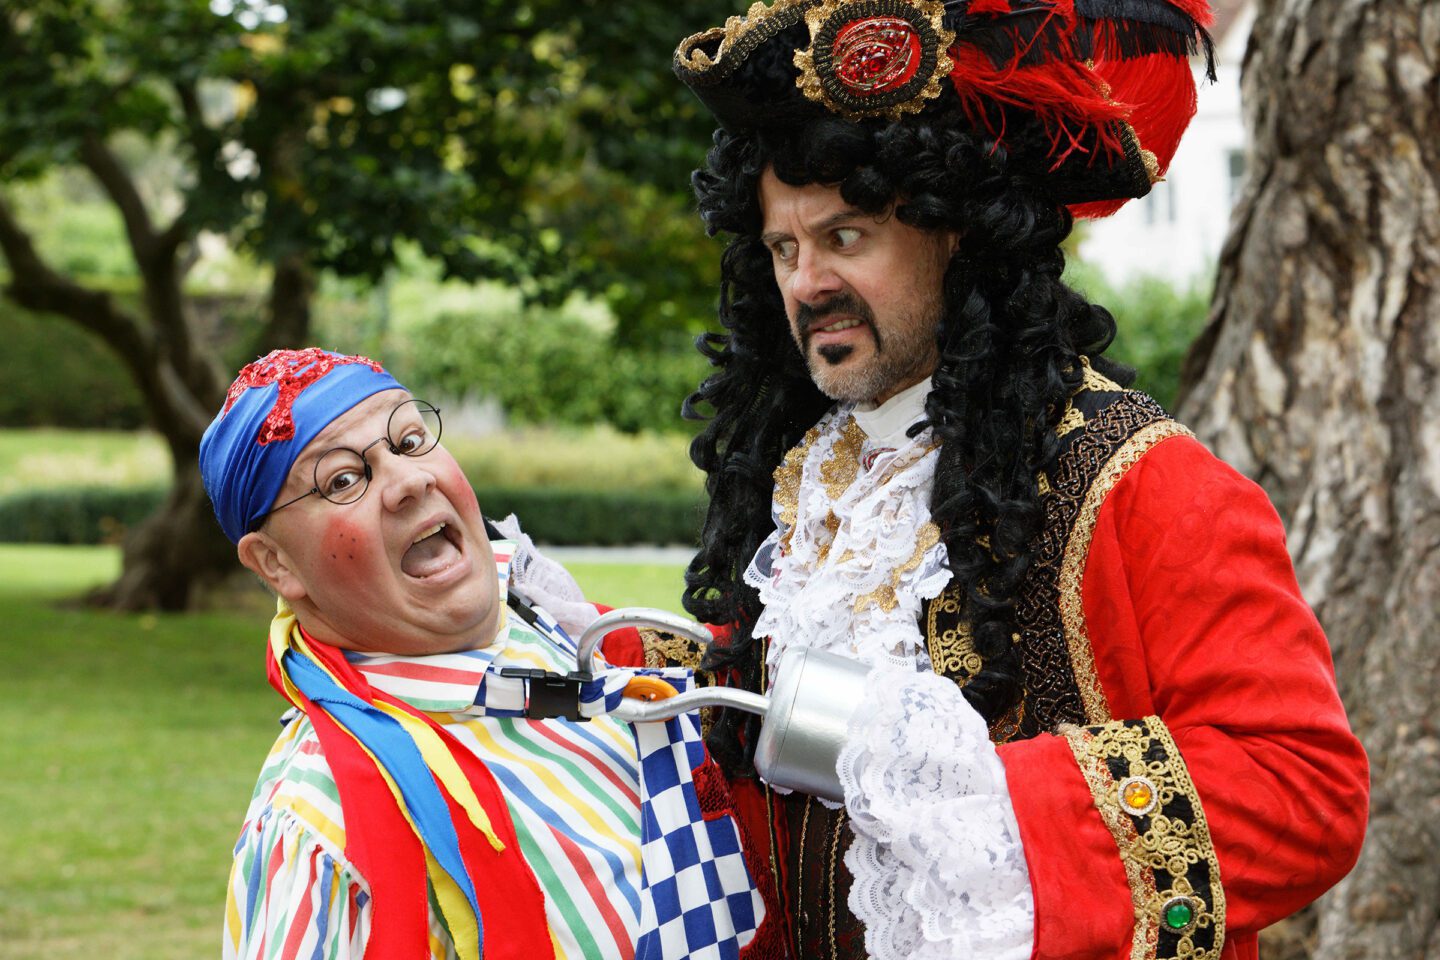 Peter Pan pantomime at Malvern Theatres Captain Hook and Smee pictured outside next to a tree with grass in the background